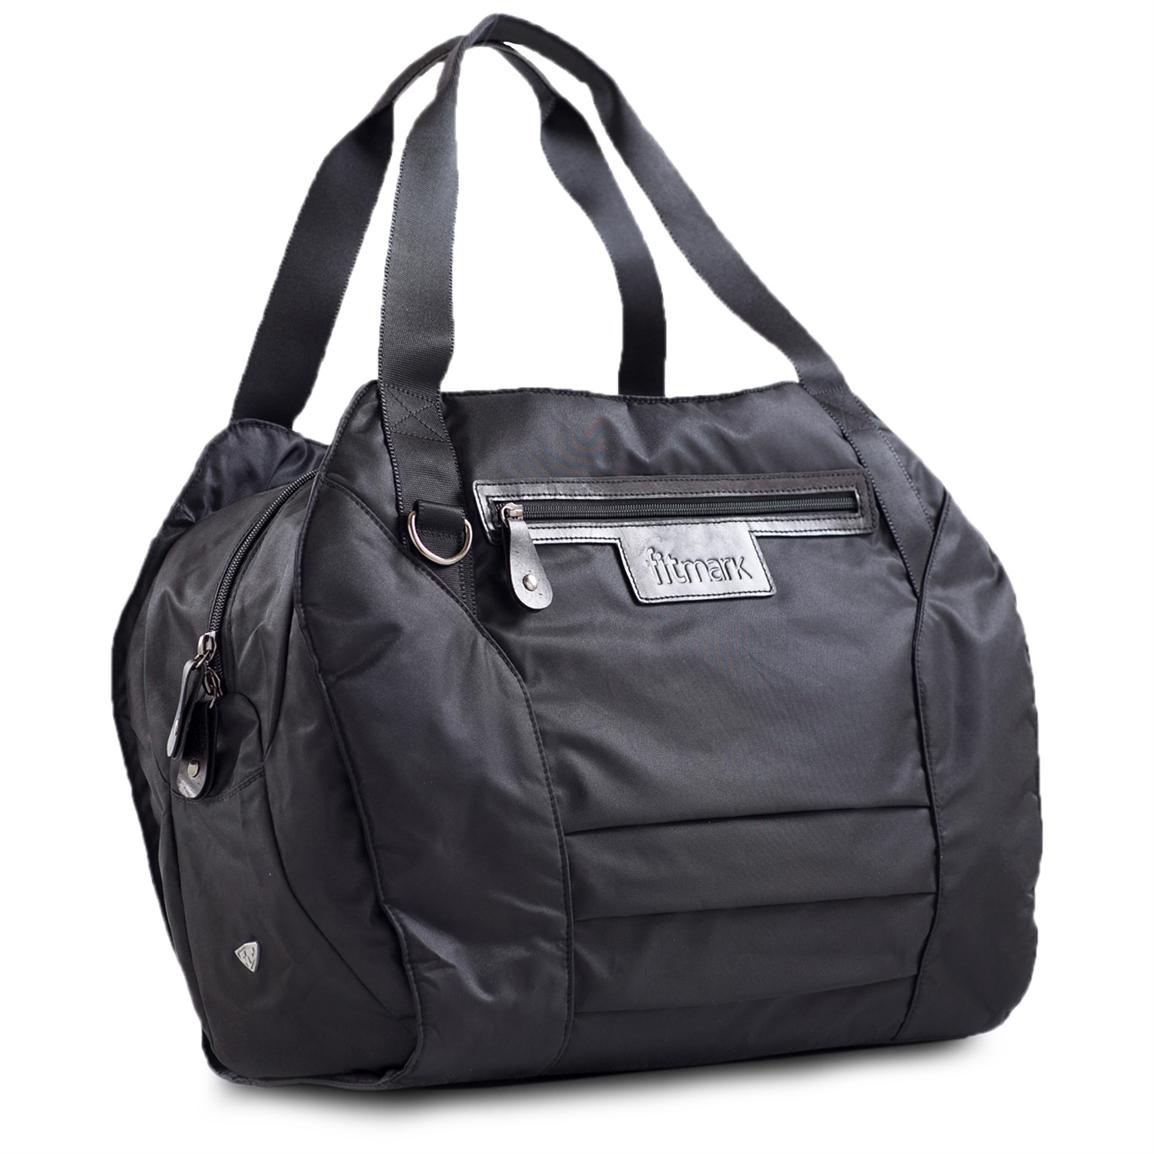 Fitmark™ Sport Tote Bag - 293879, at Sportsman's Guide